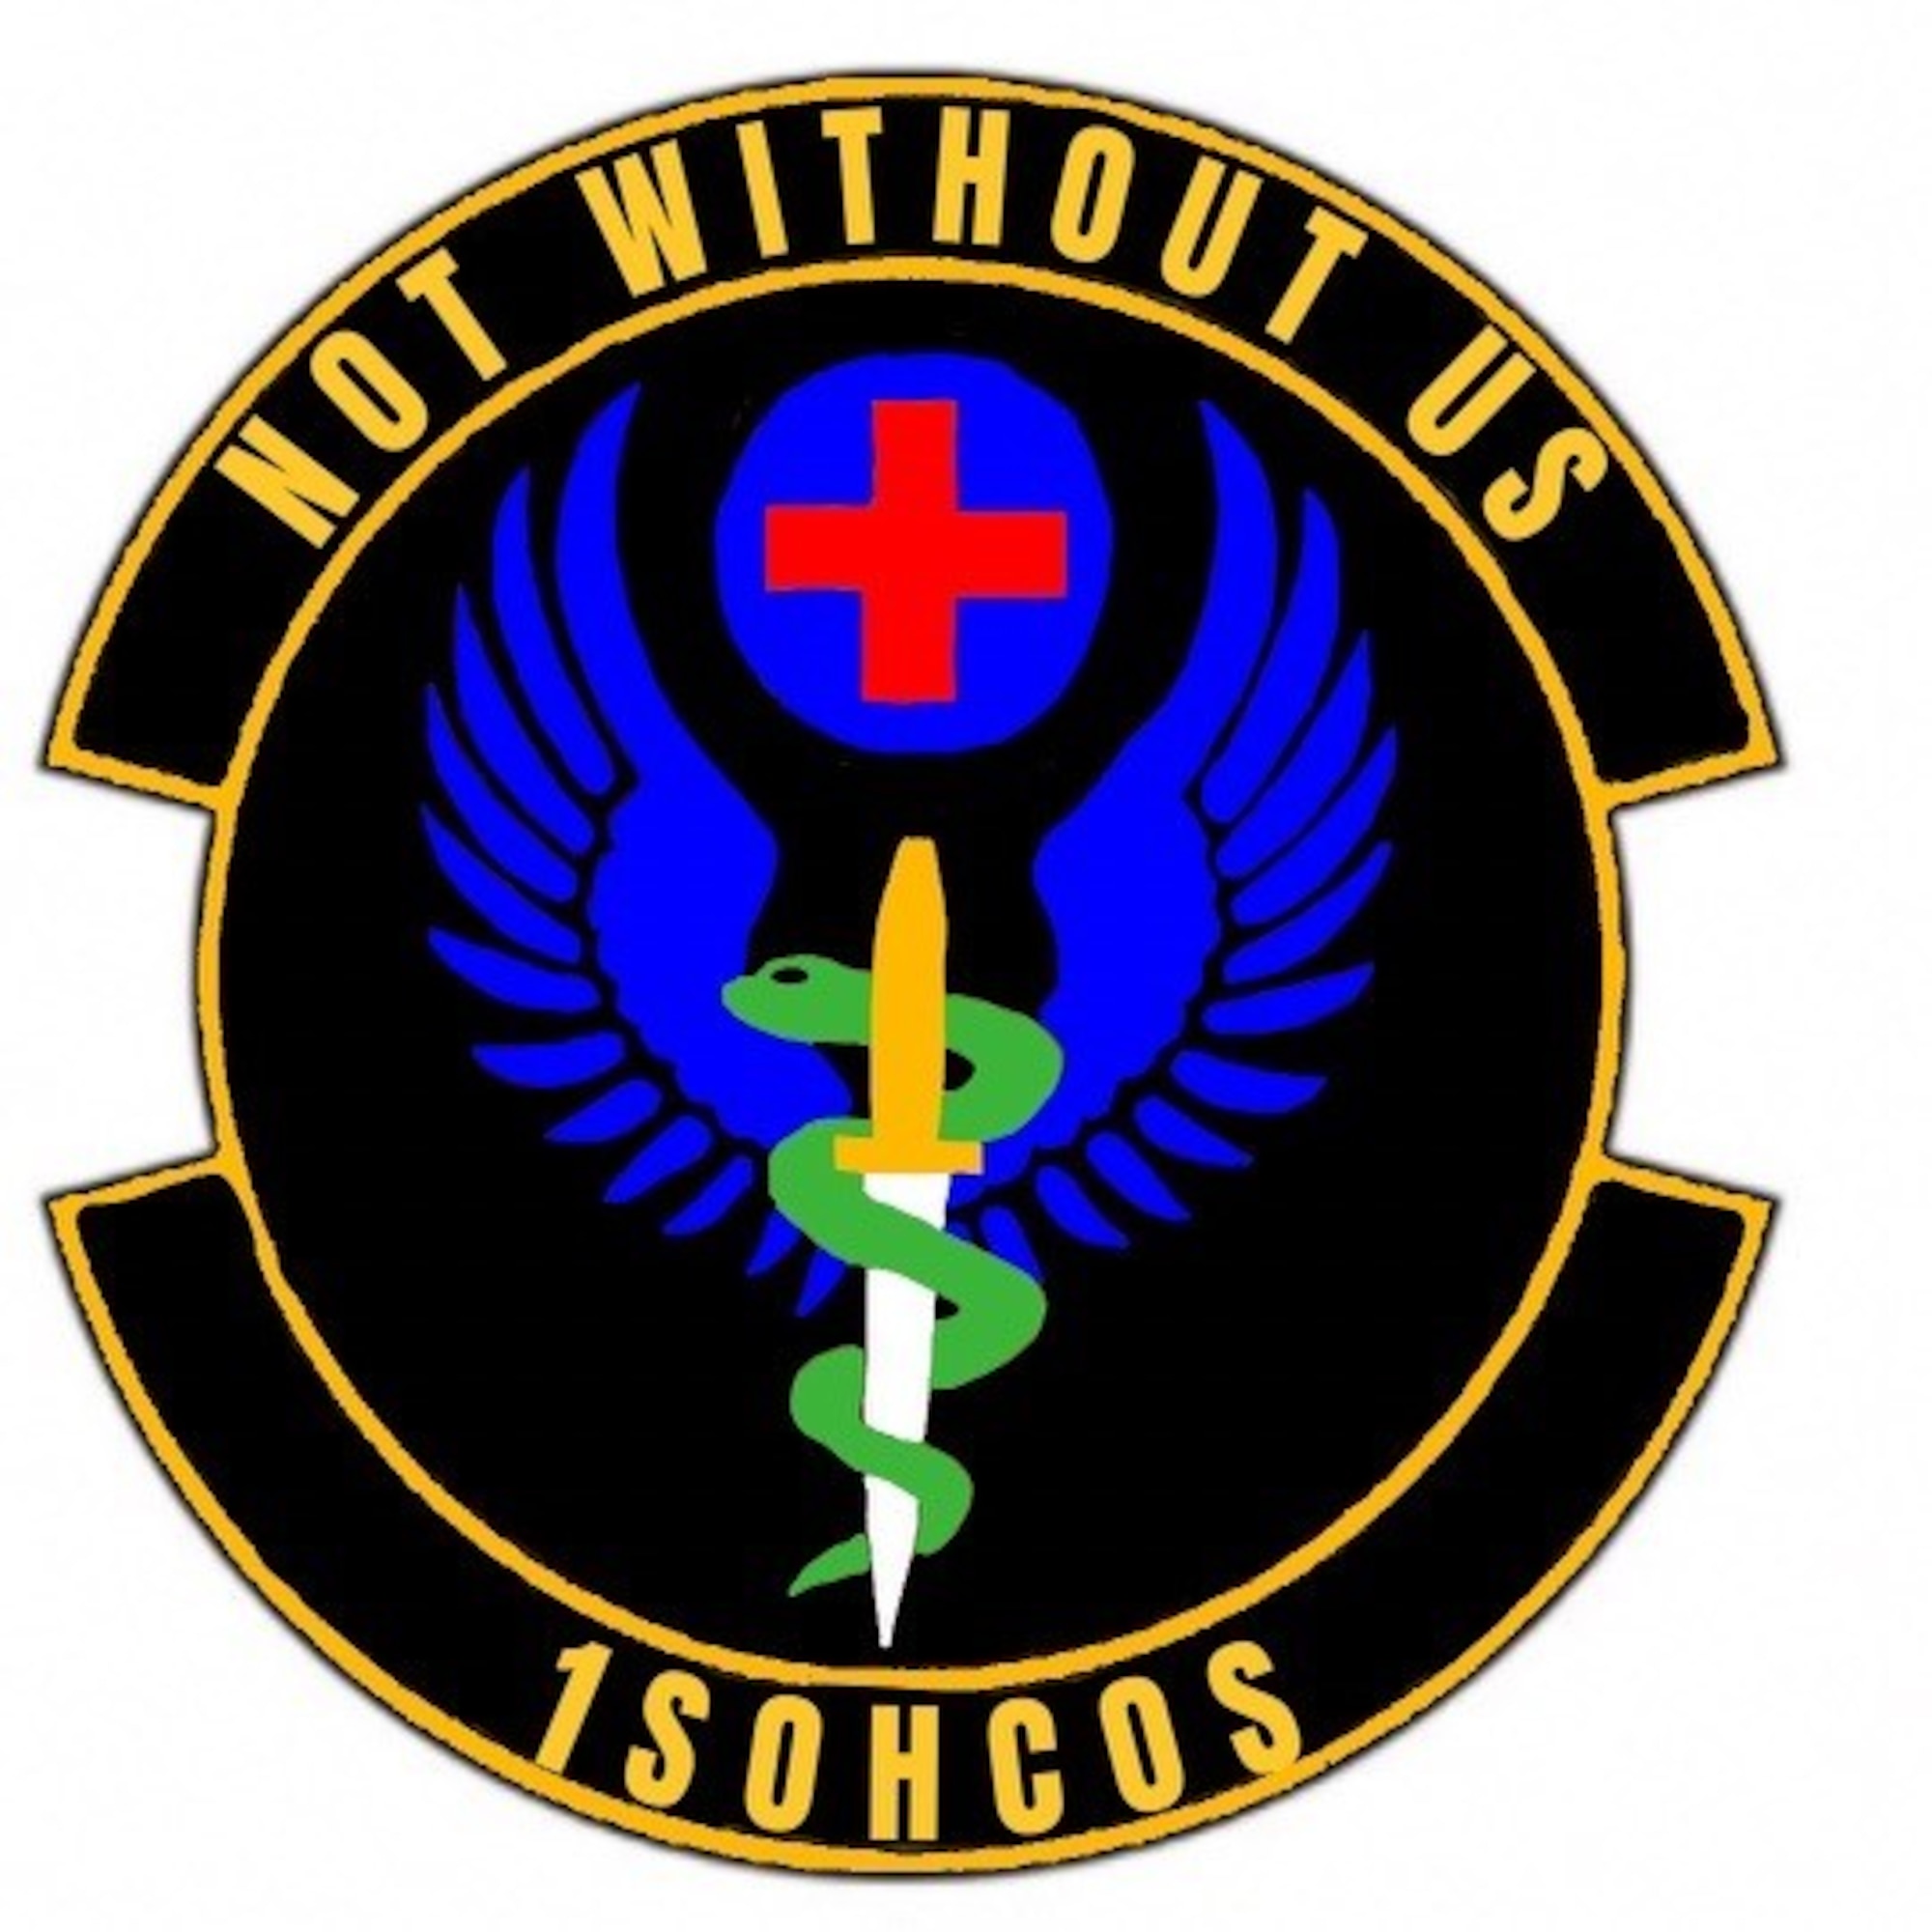 The 1st Special Operations Health Care Operations Squadron patch.